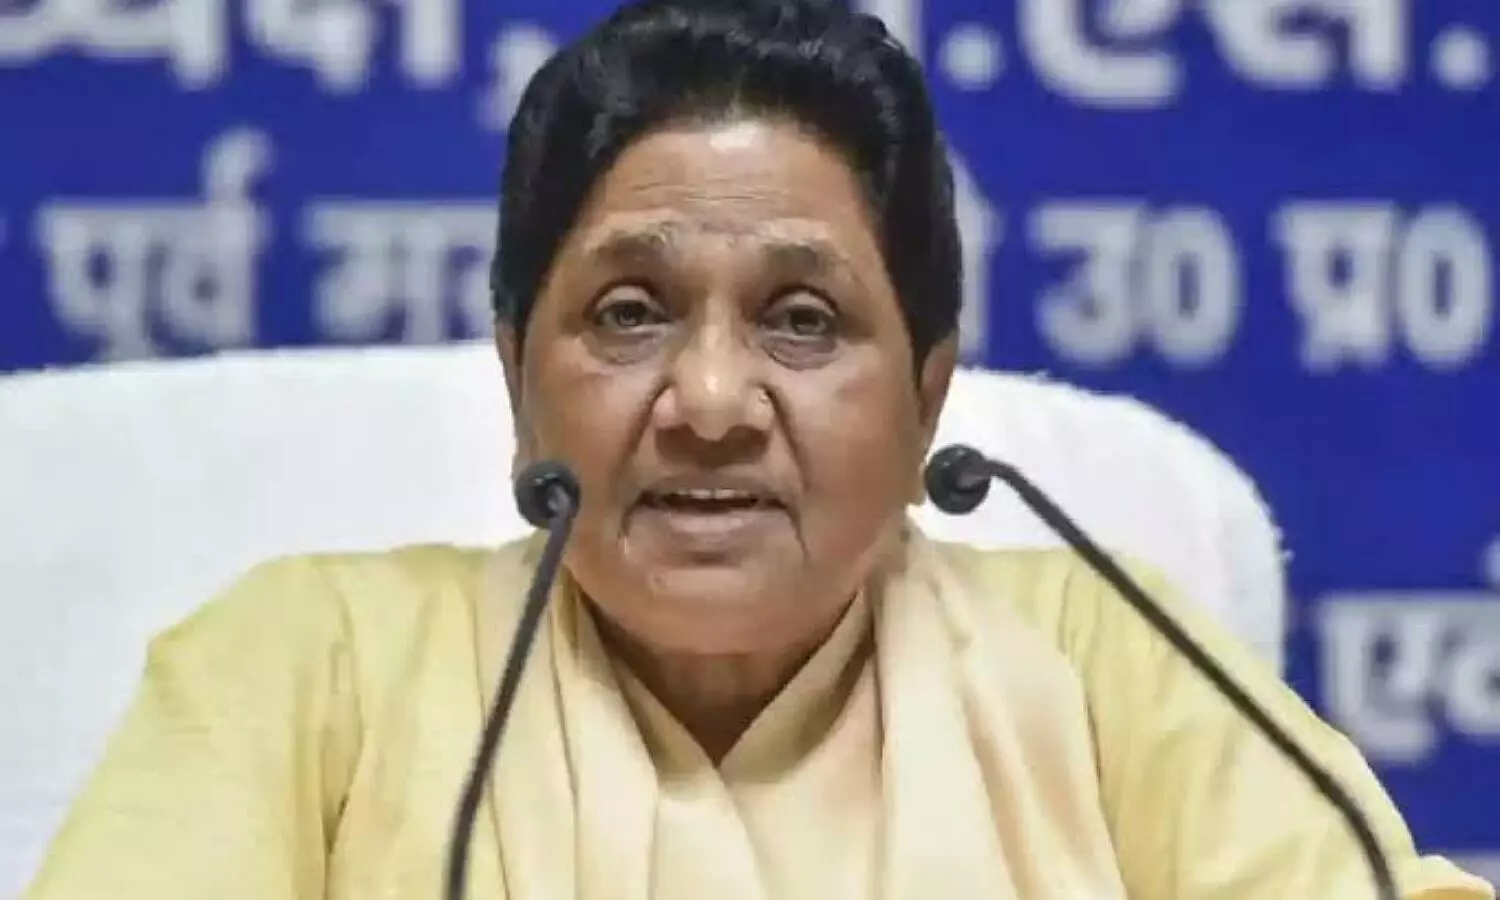 bsp chief mayawati attacks bjp says on gyanvapi mosque case and appeals to public to be alert